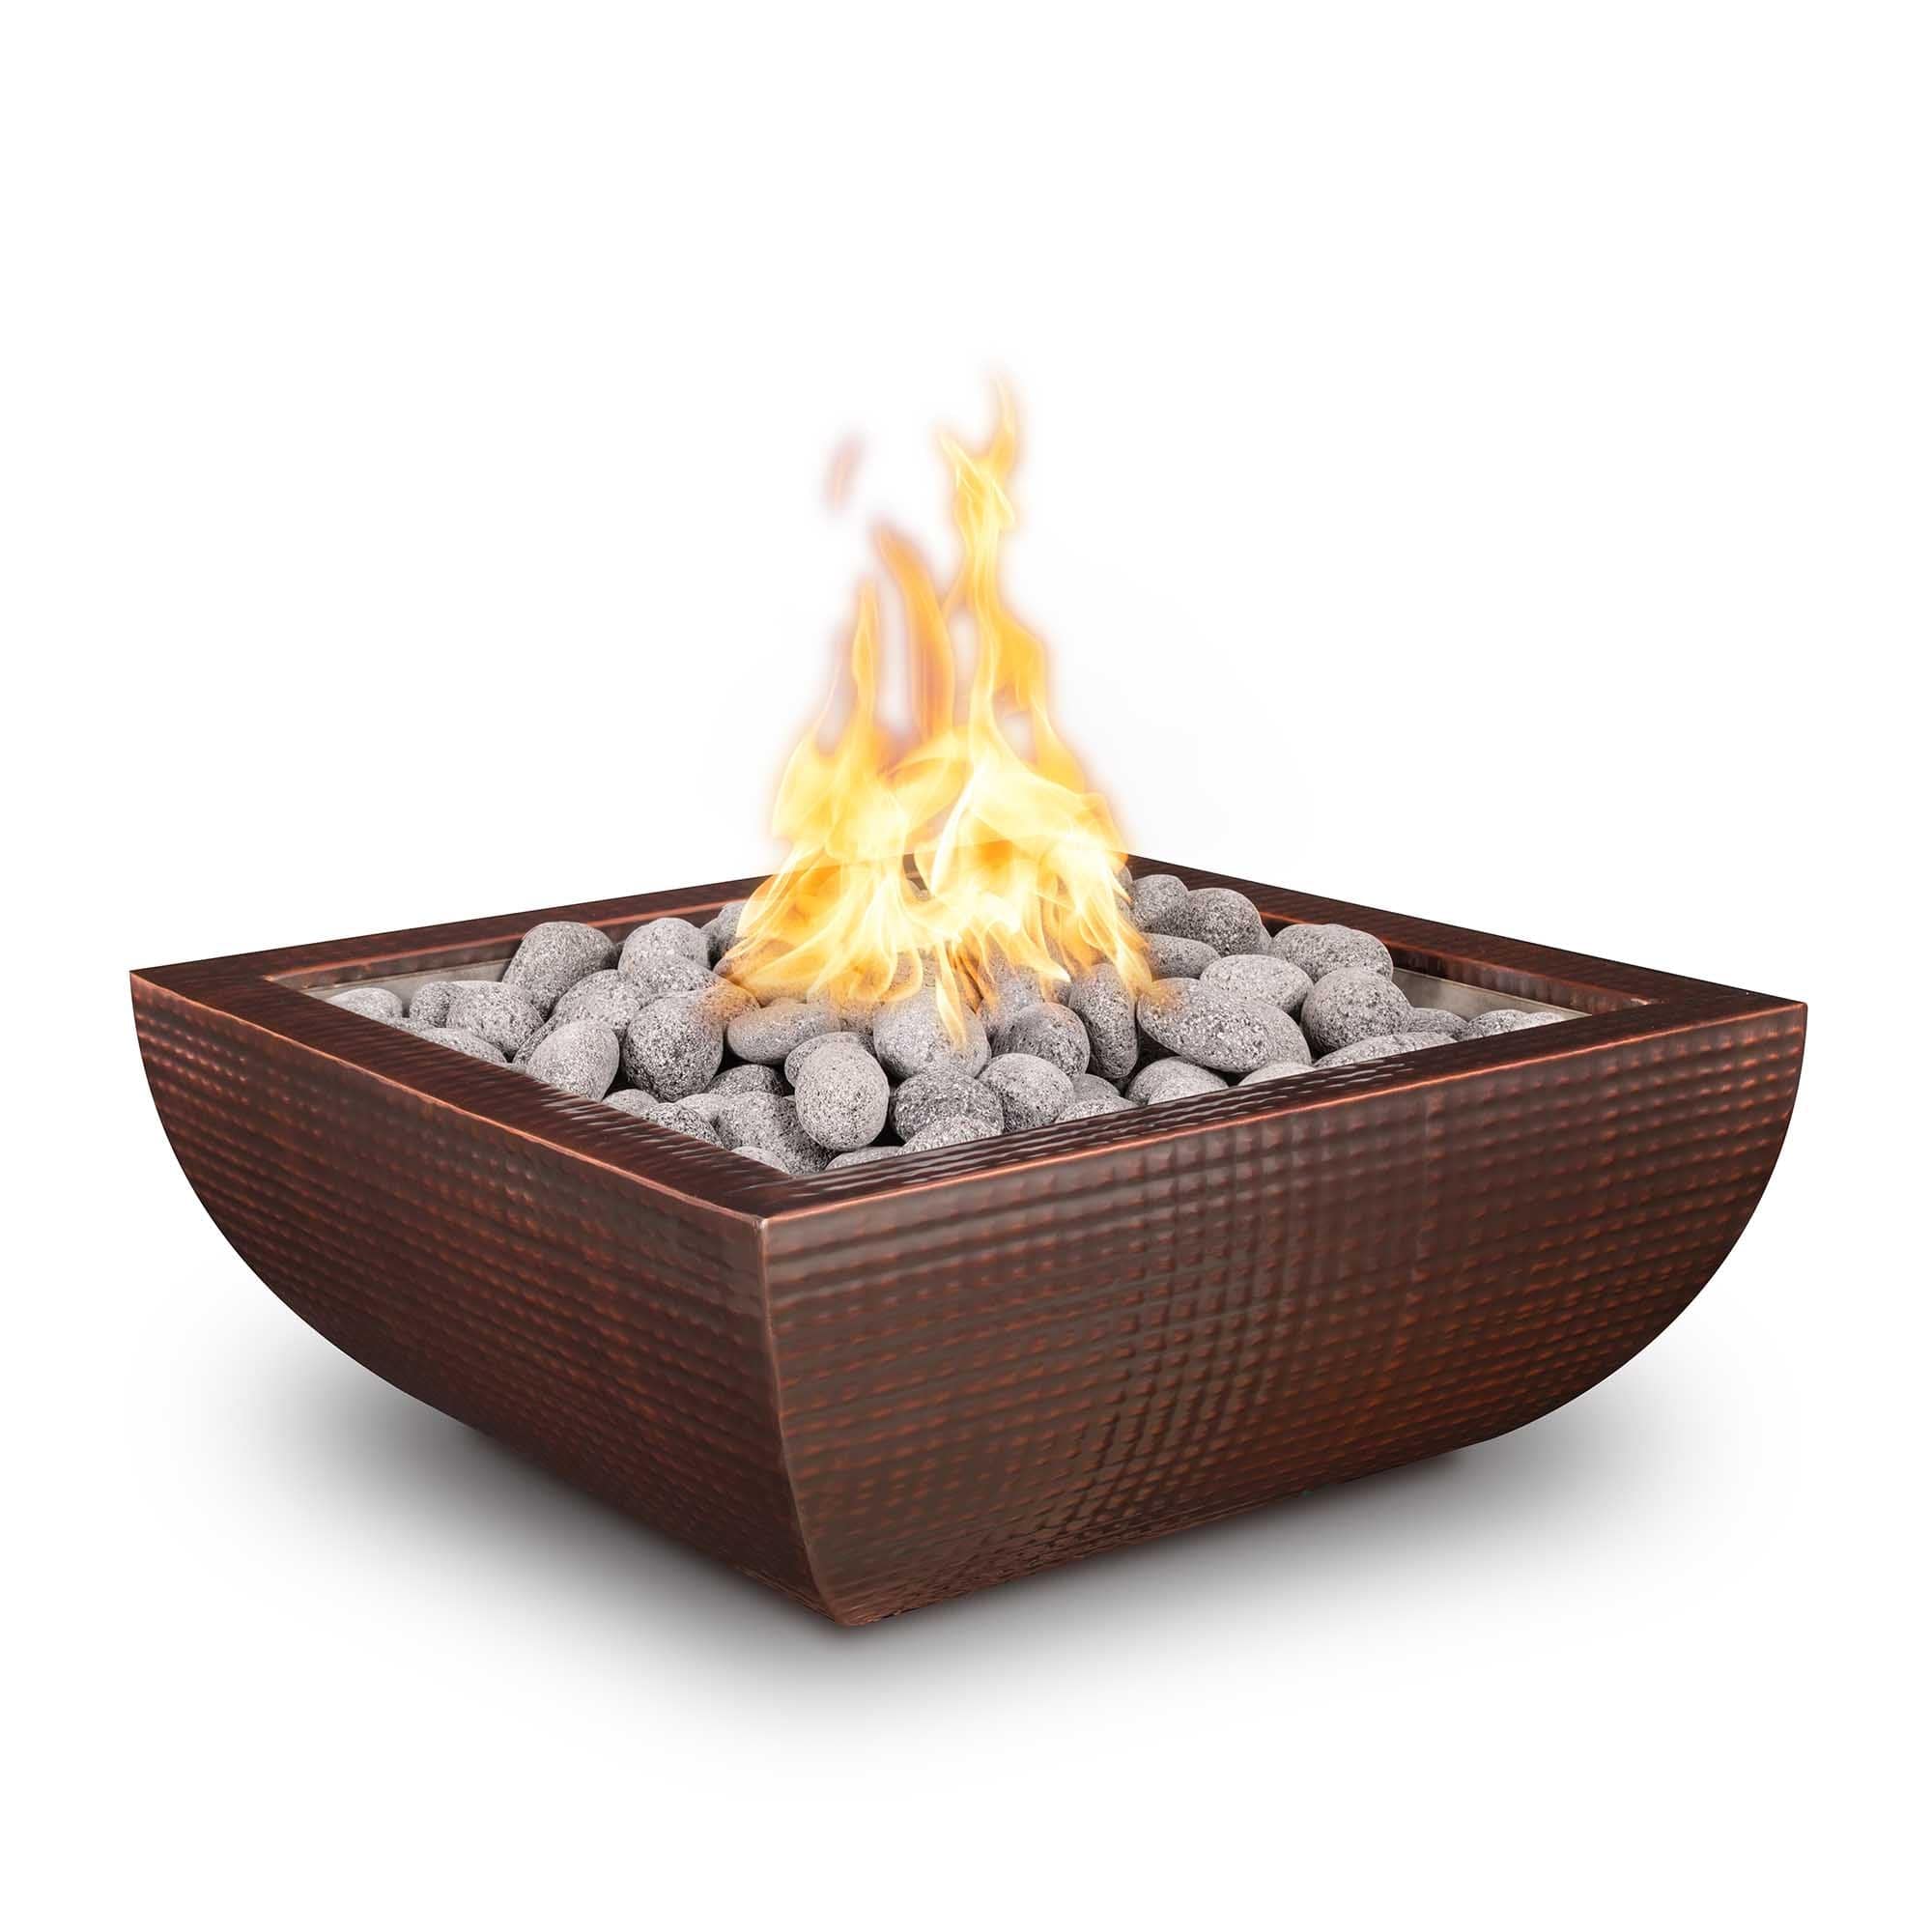 The Outdoor Plus Fire Bowl 24" / Match Lit The Outdoor Plus Avalon Fire Bowl | Hammered Copper OPT-24AVCPF